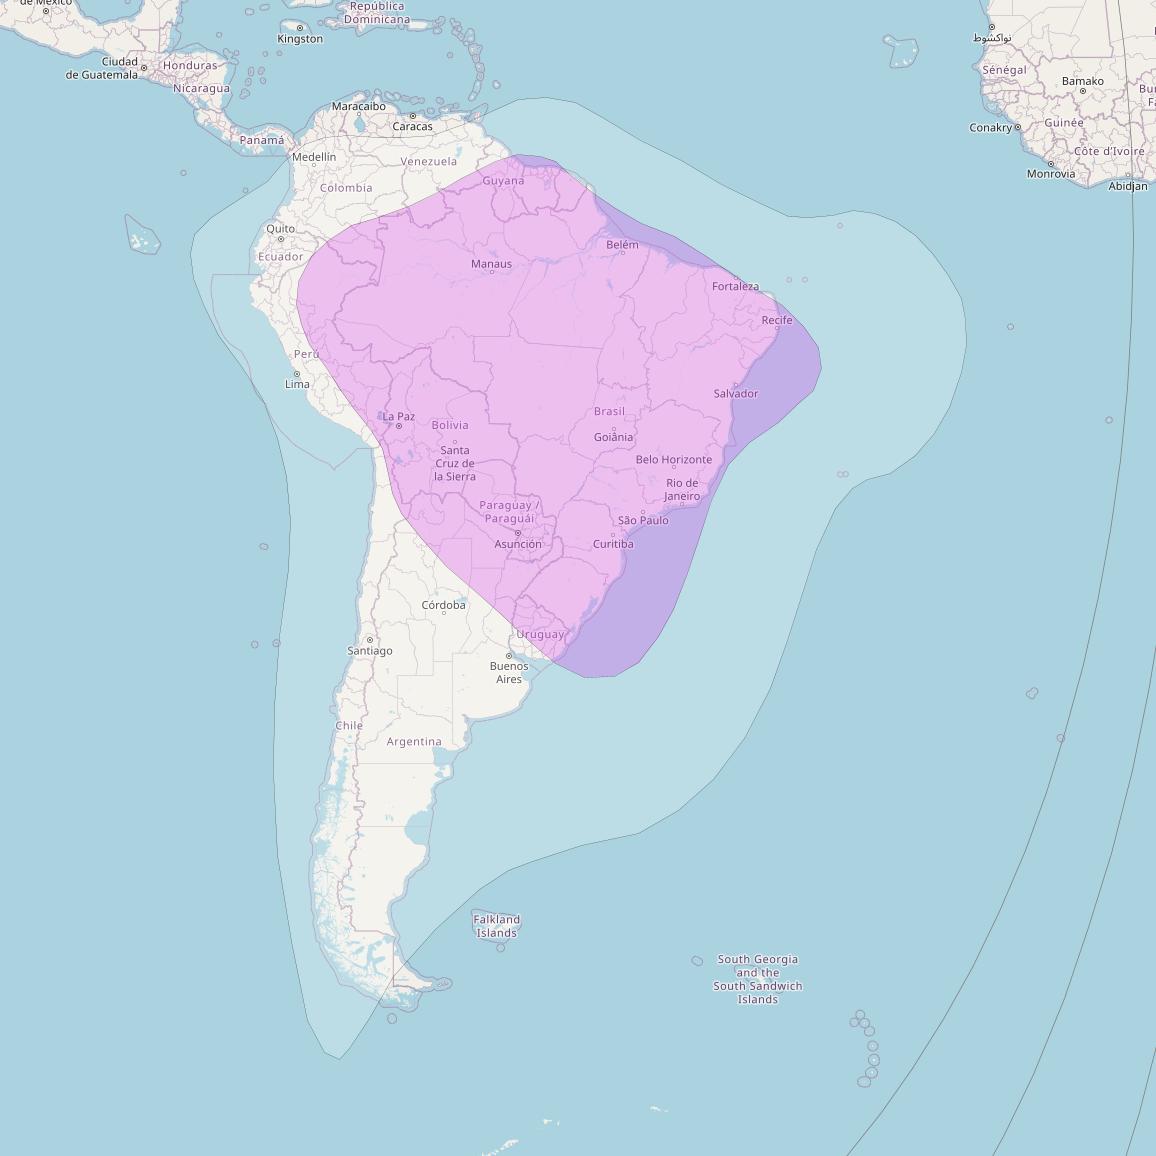 Star One C3 at 75° W downlink C-band South America beam coverage map